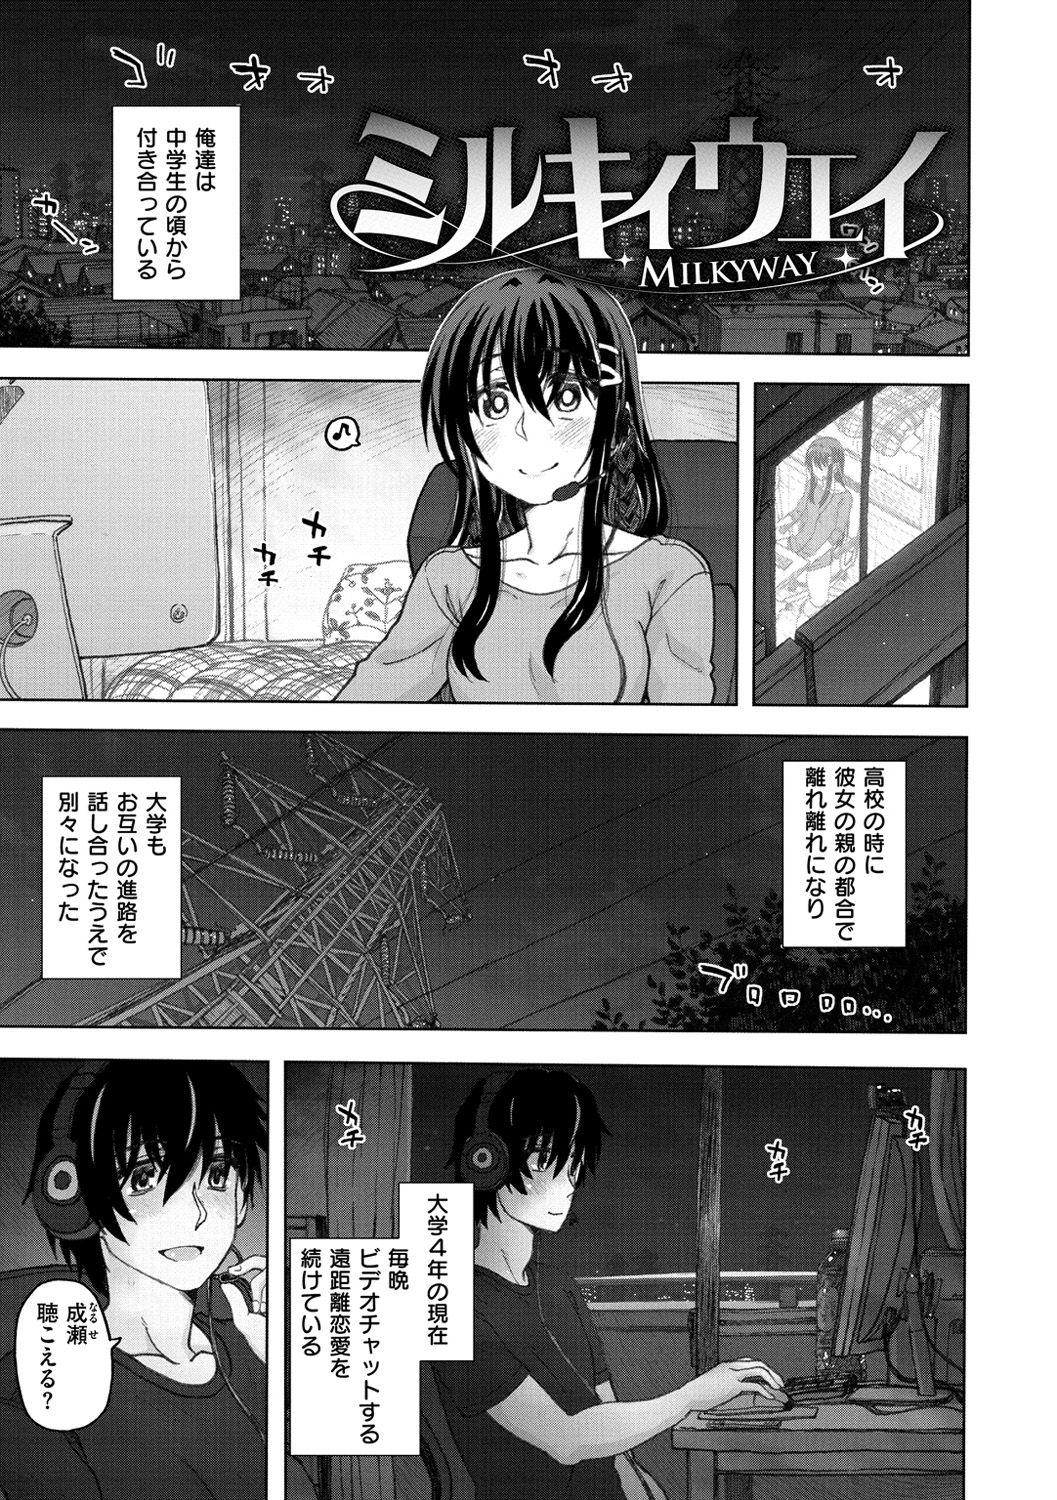 Exposed Koubi no Jikan - Time of the copulation. Mofos - Page 5